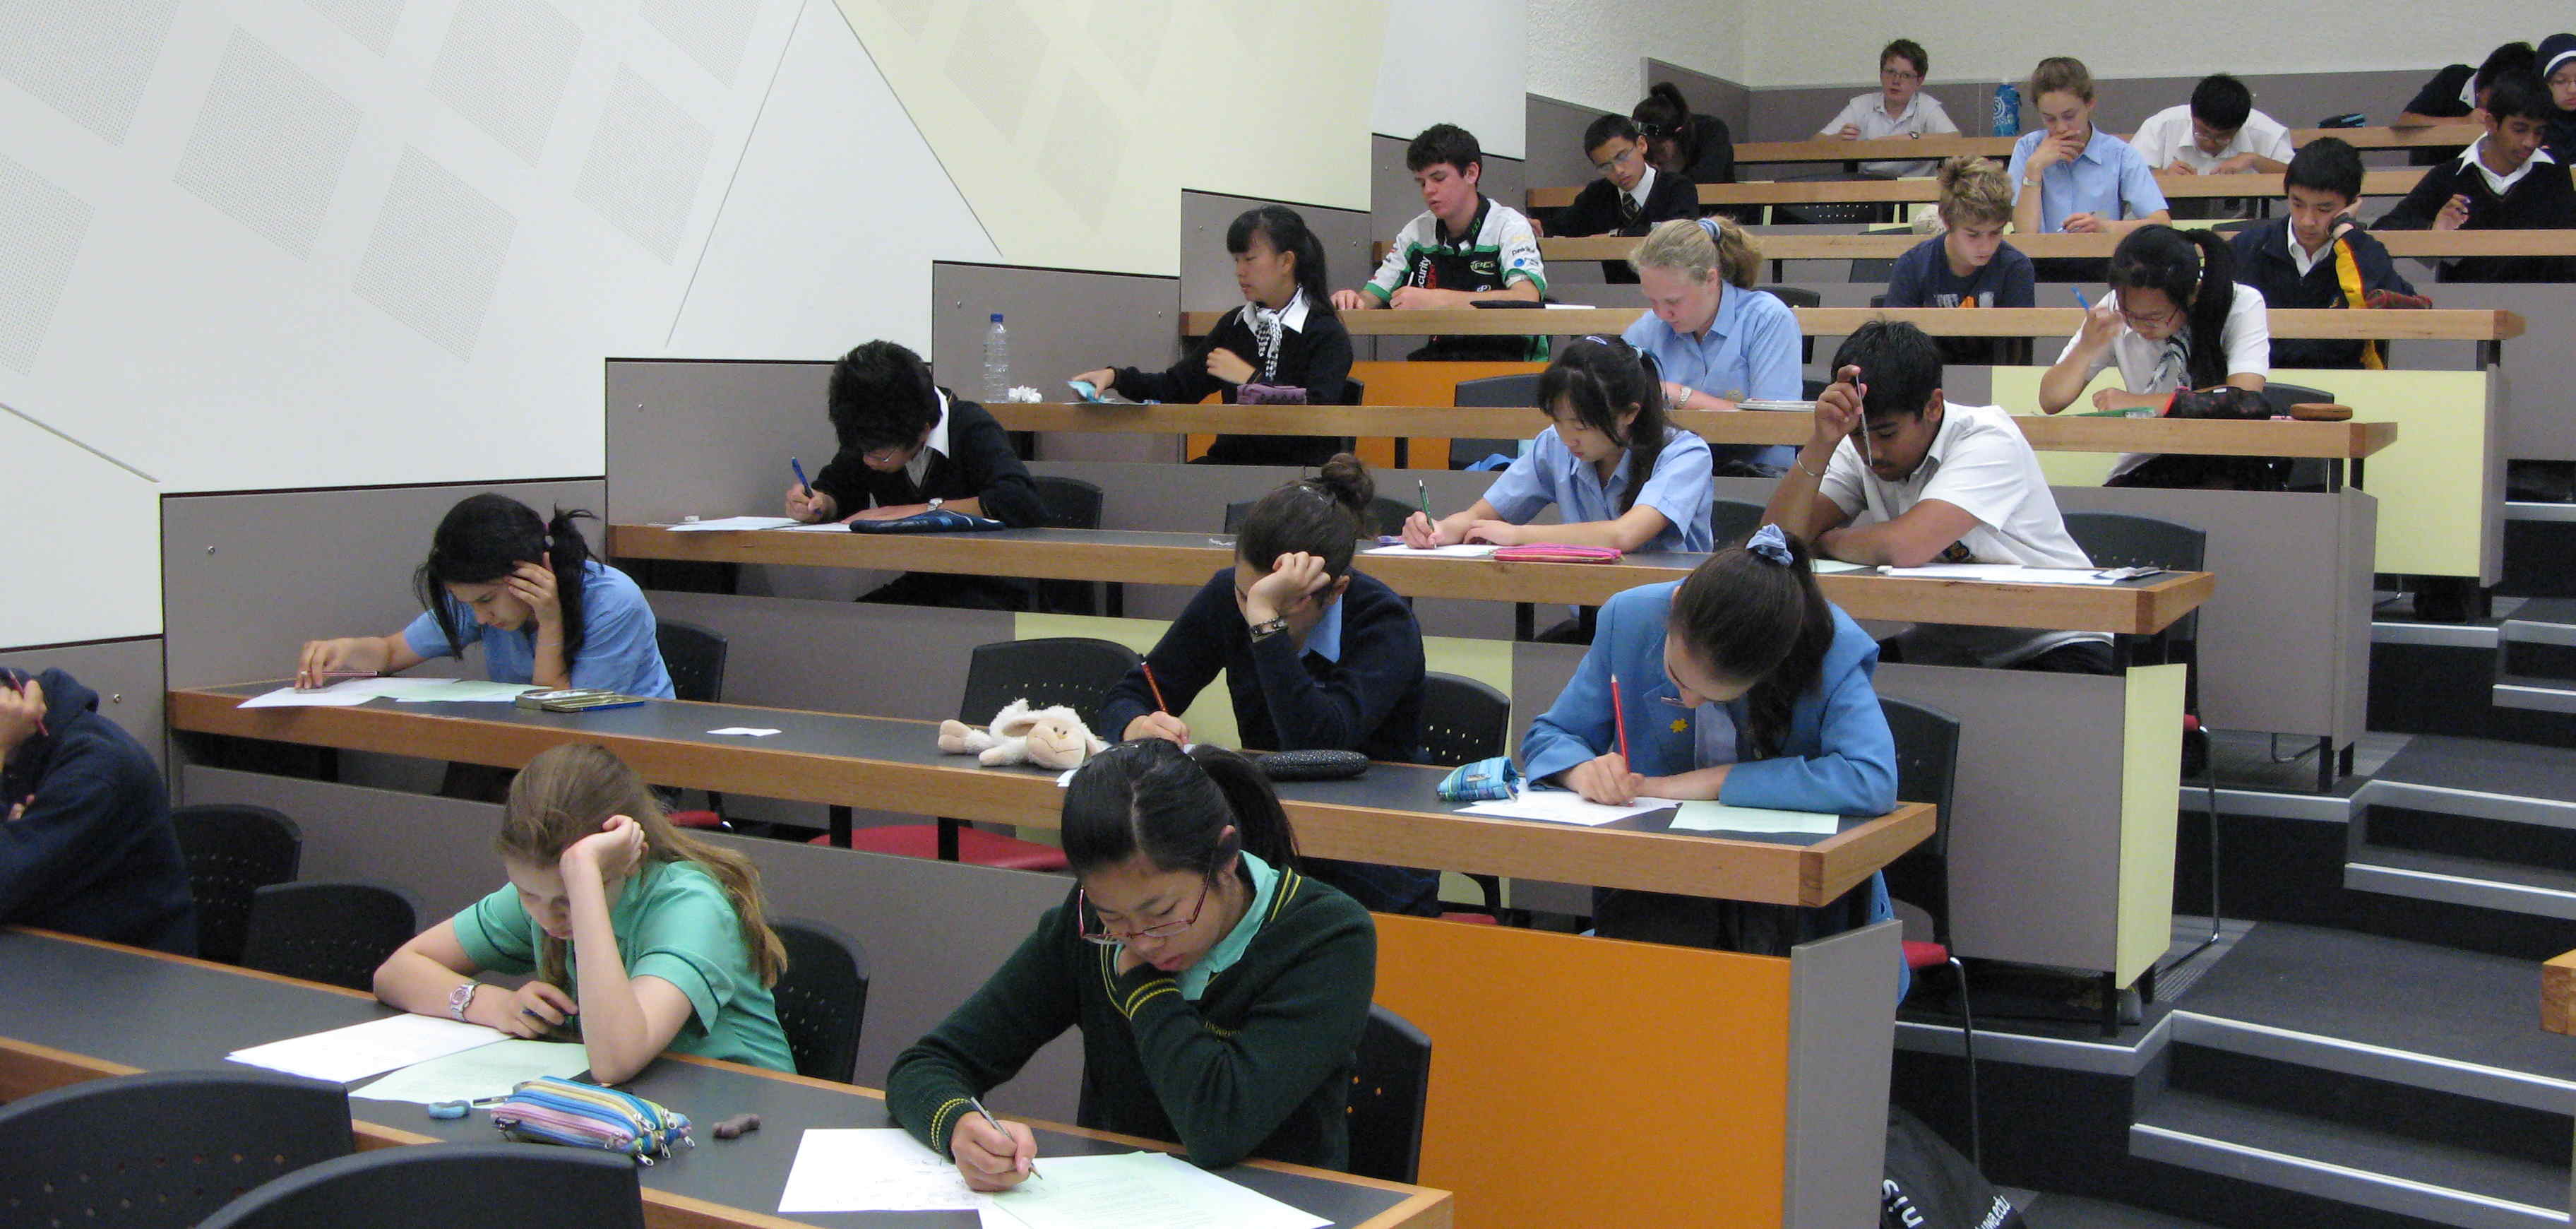 WAJO 2010: Individual Competition in Engineering Lecture Theatre 1